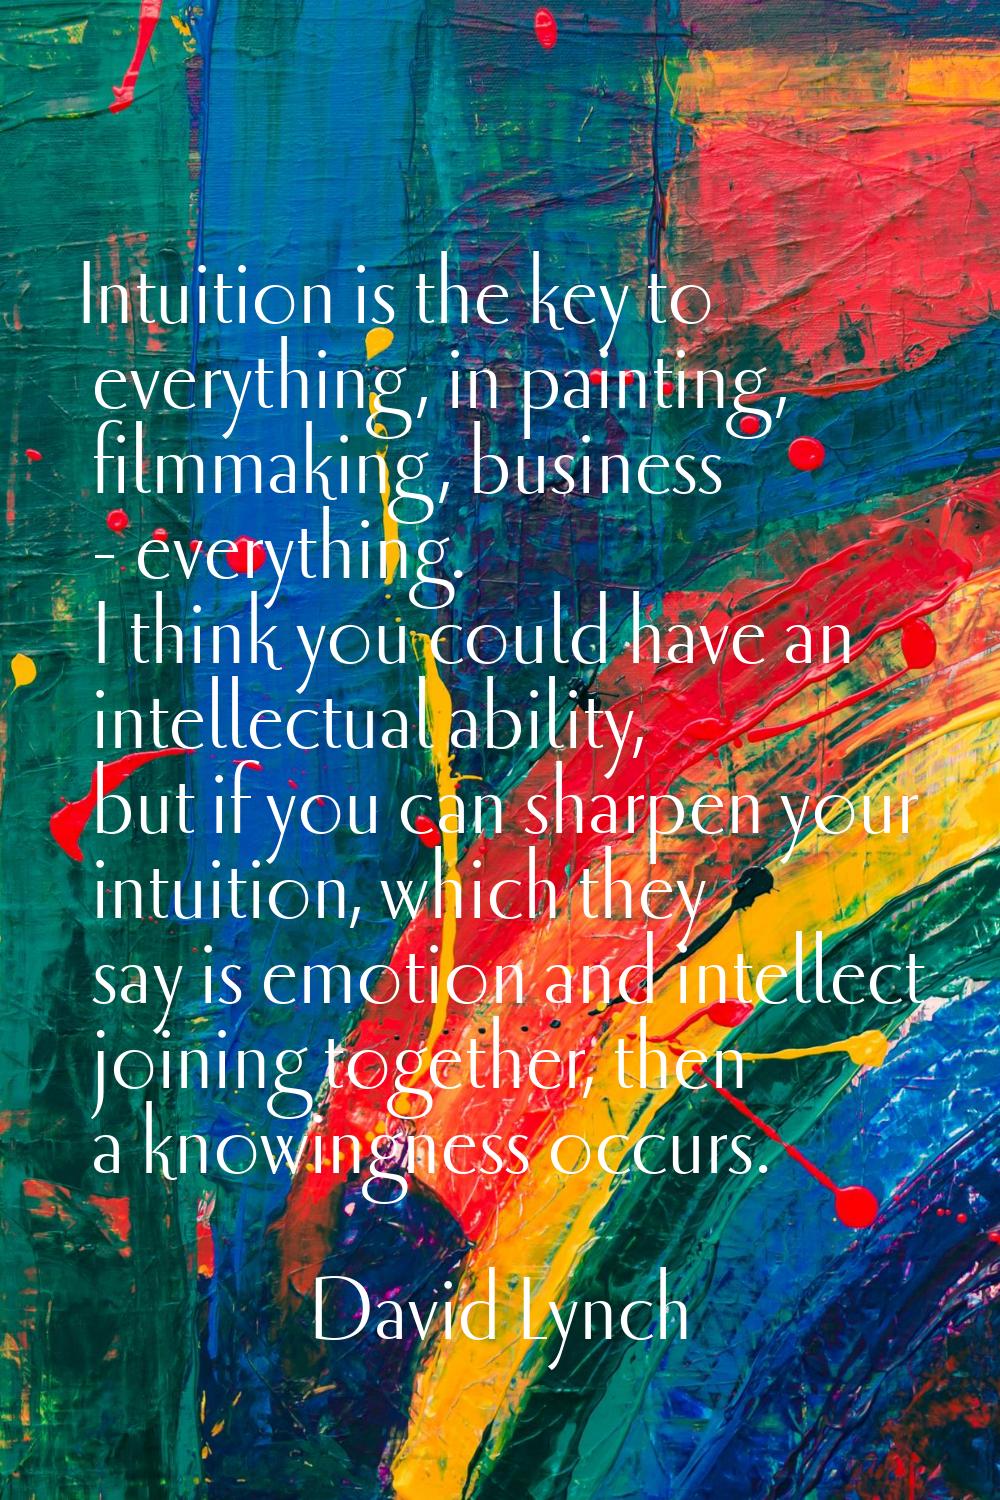 Intuition is the key to everything, in painting, filmmaking, business - everything. I think you cou